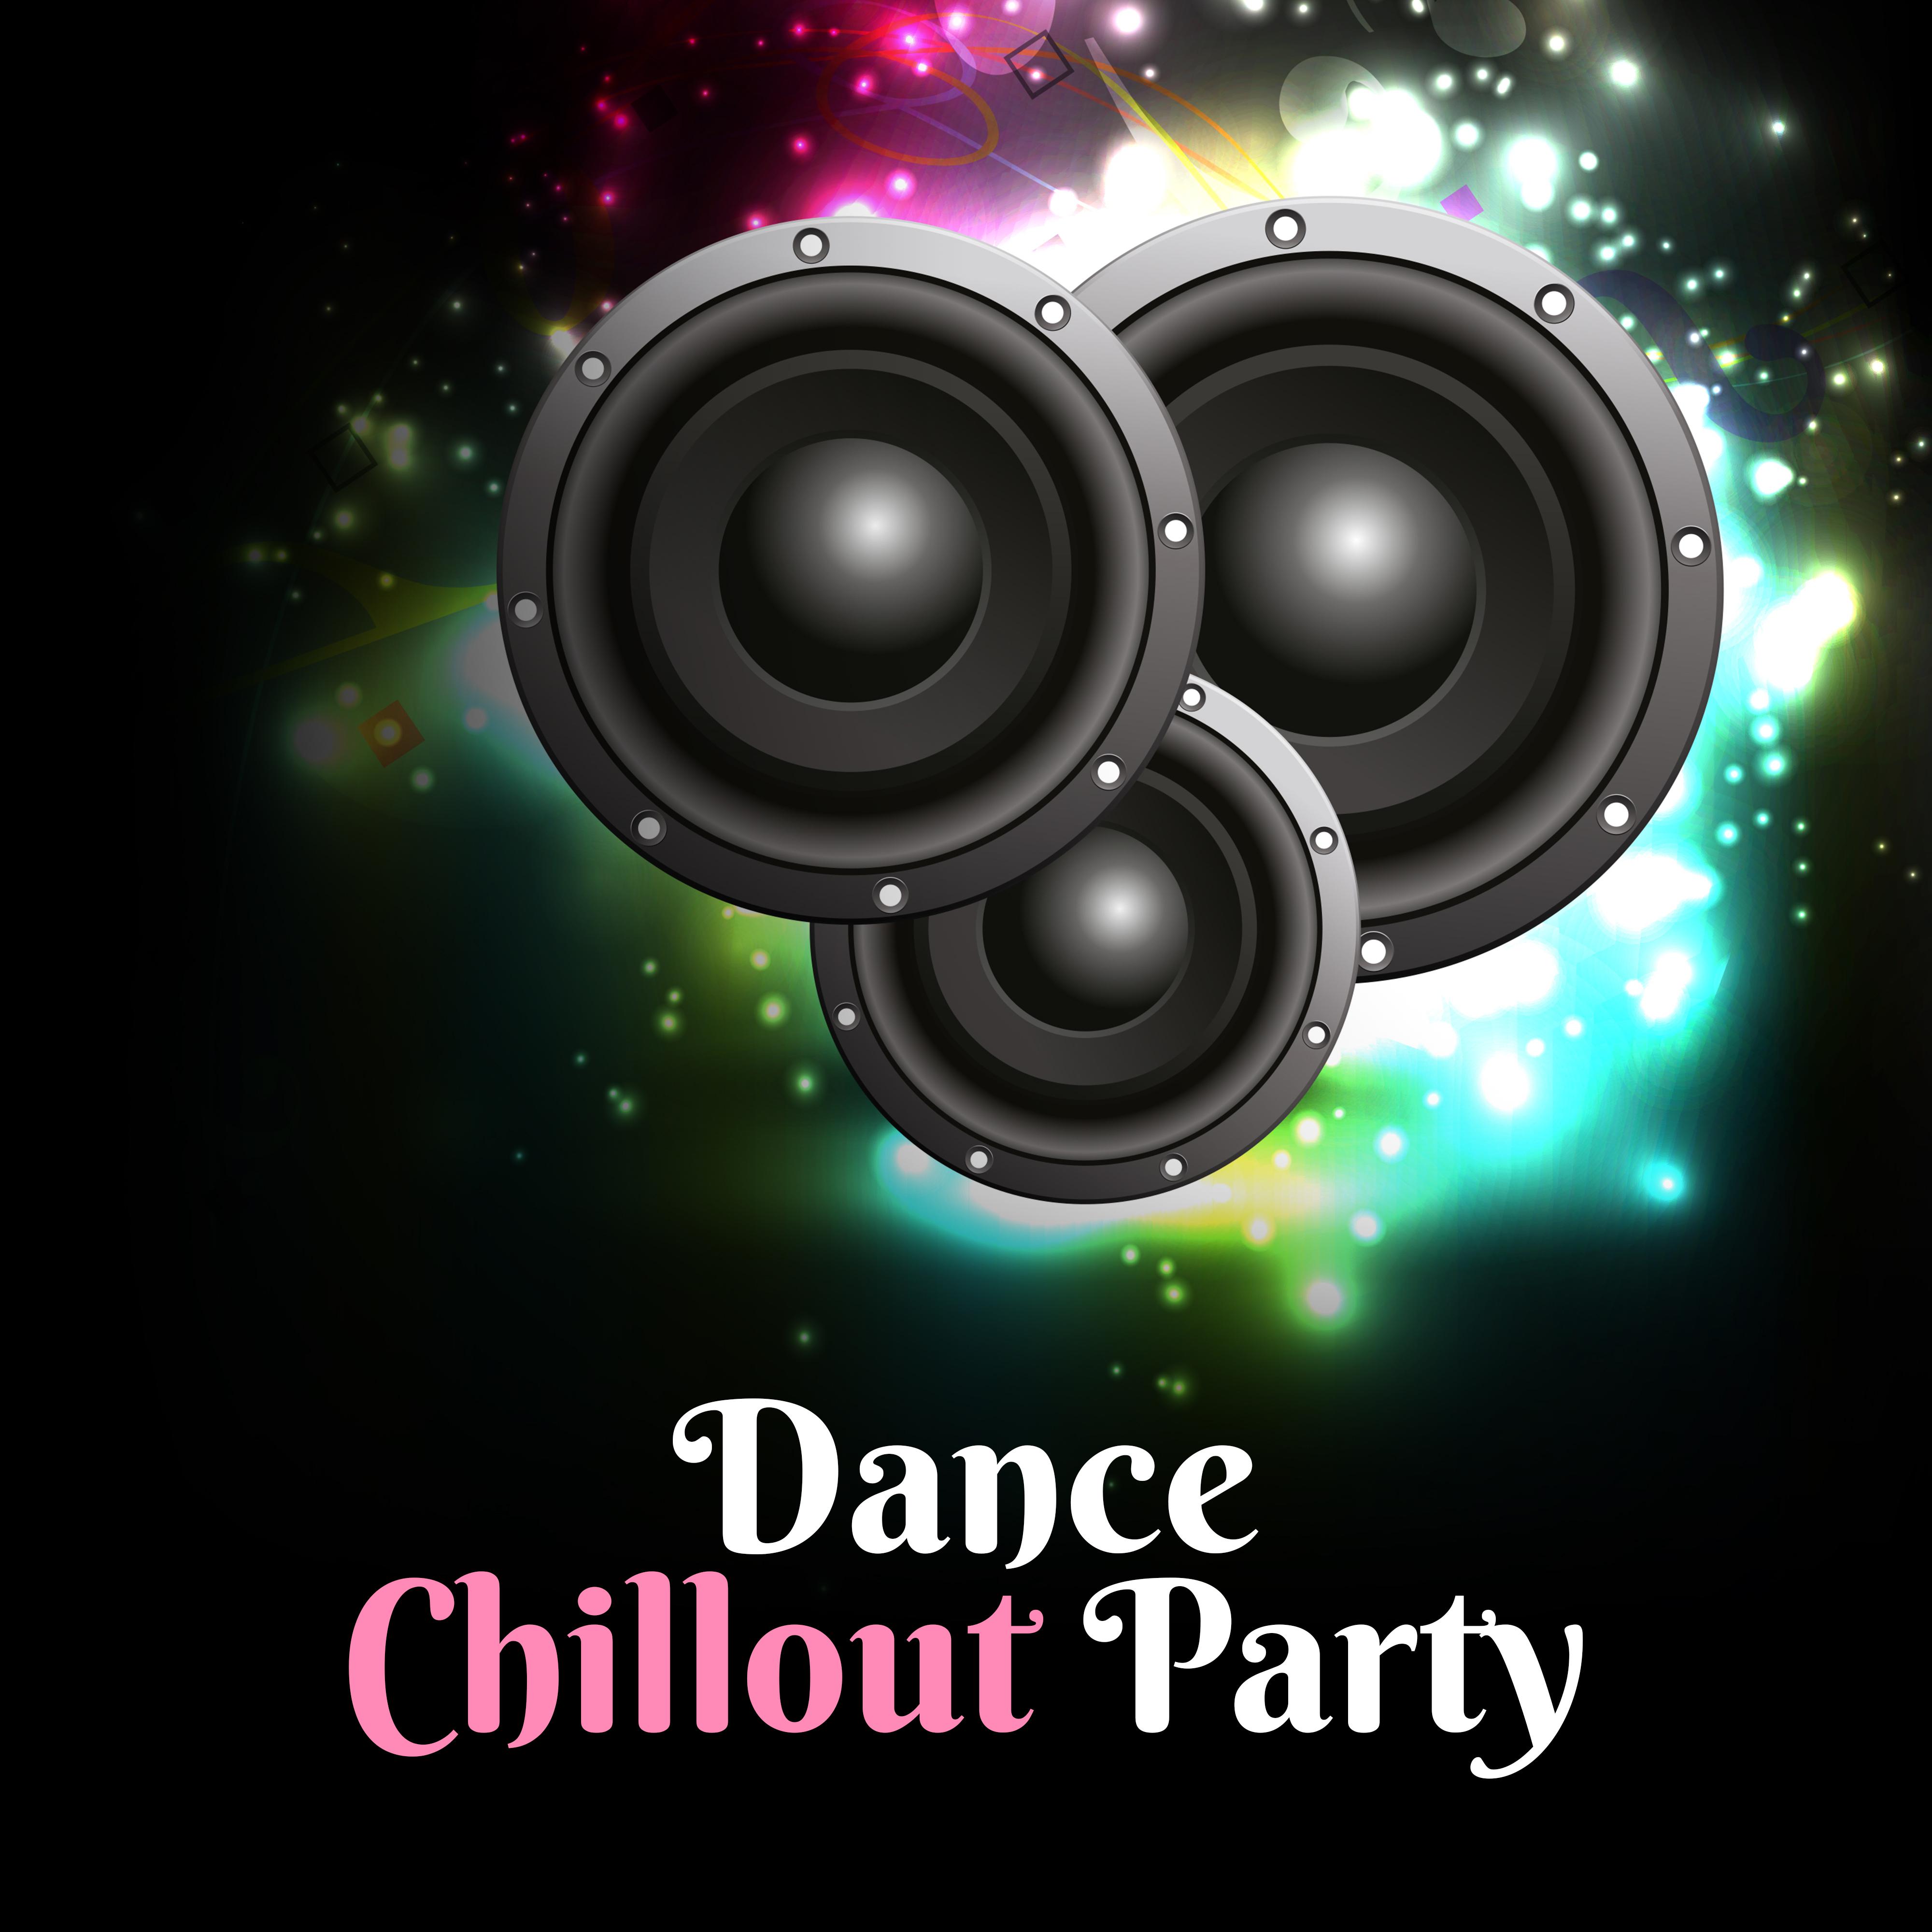 Dance Chillout Party  Best Party Chill Out Music, Ibiza Night, Cocktails  Drinks, Beach Dancefloor